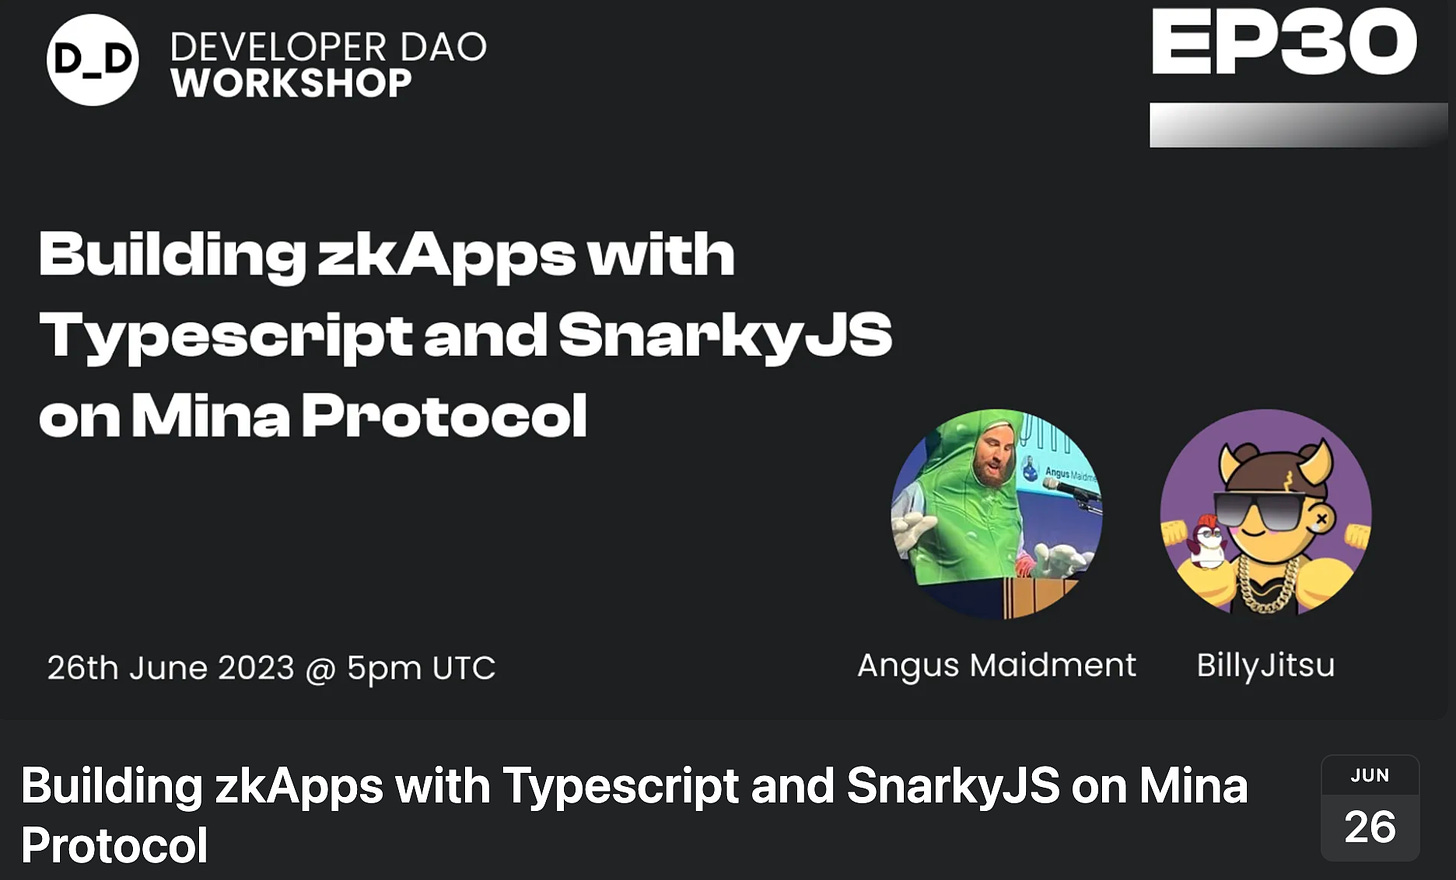 Building zkApps with Typescript and SnarkJS on Mina Protocol